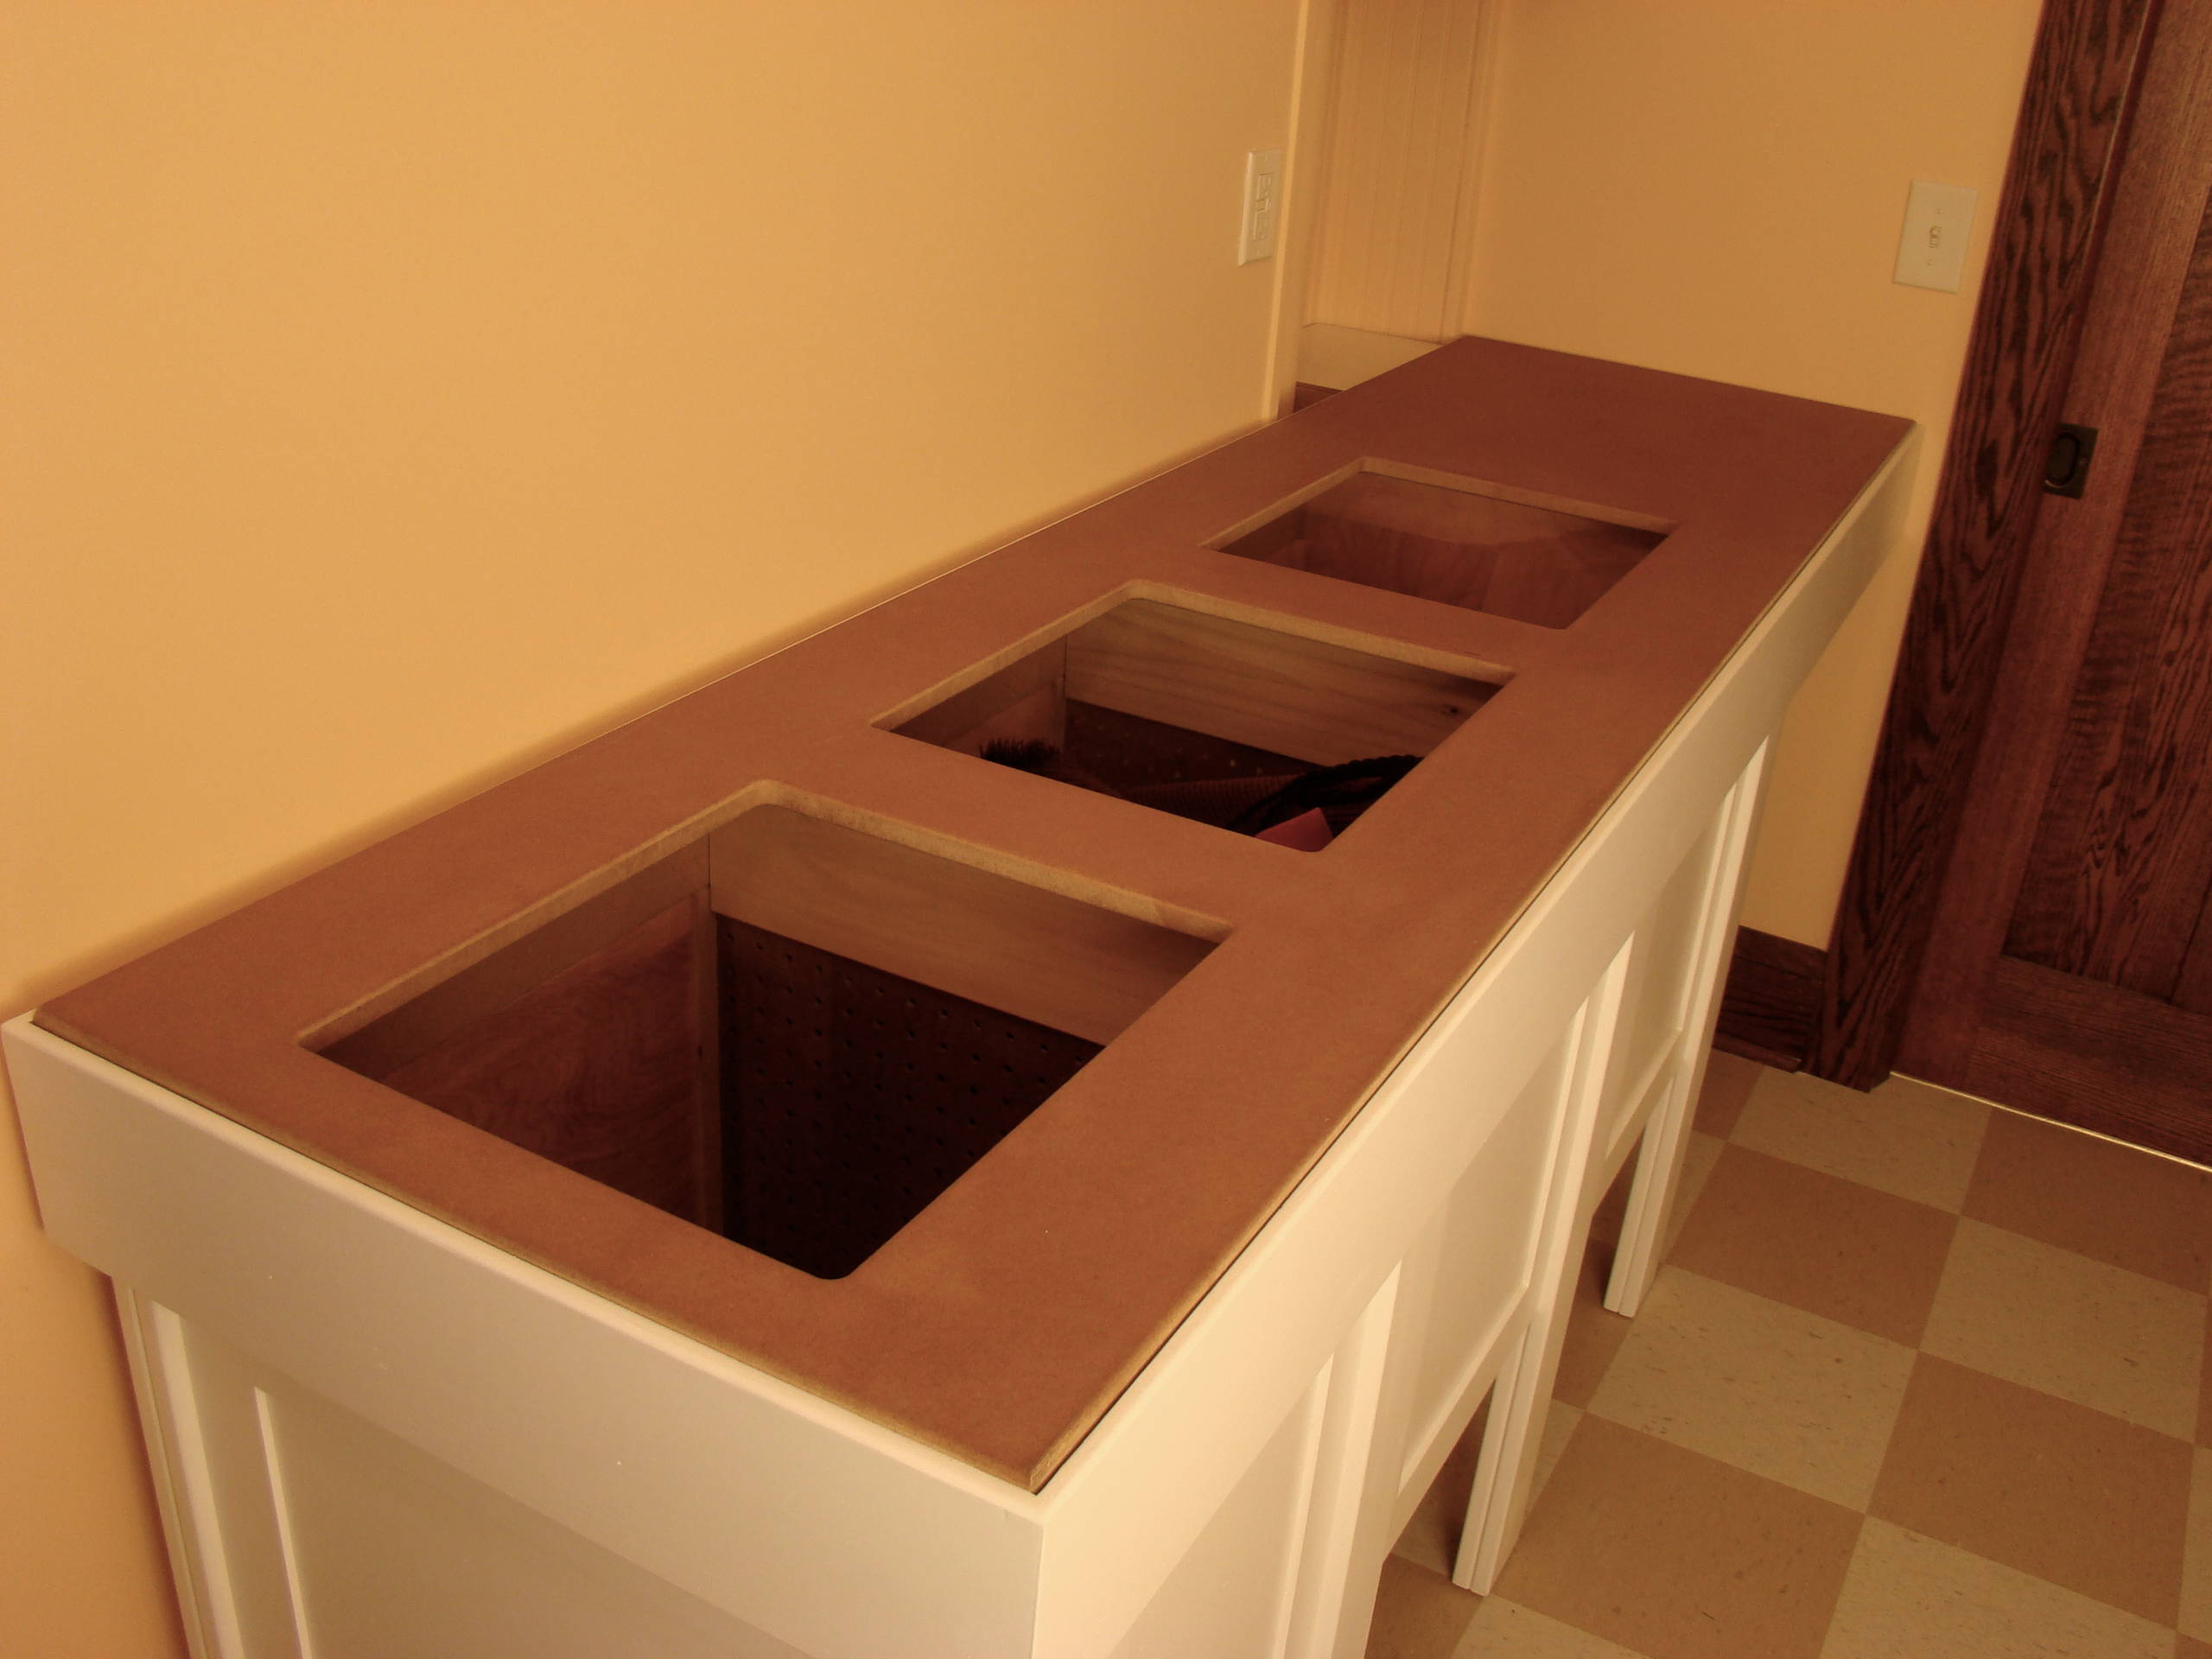 Laundry Room sorting table